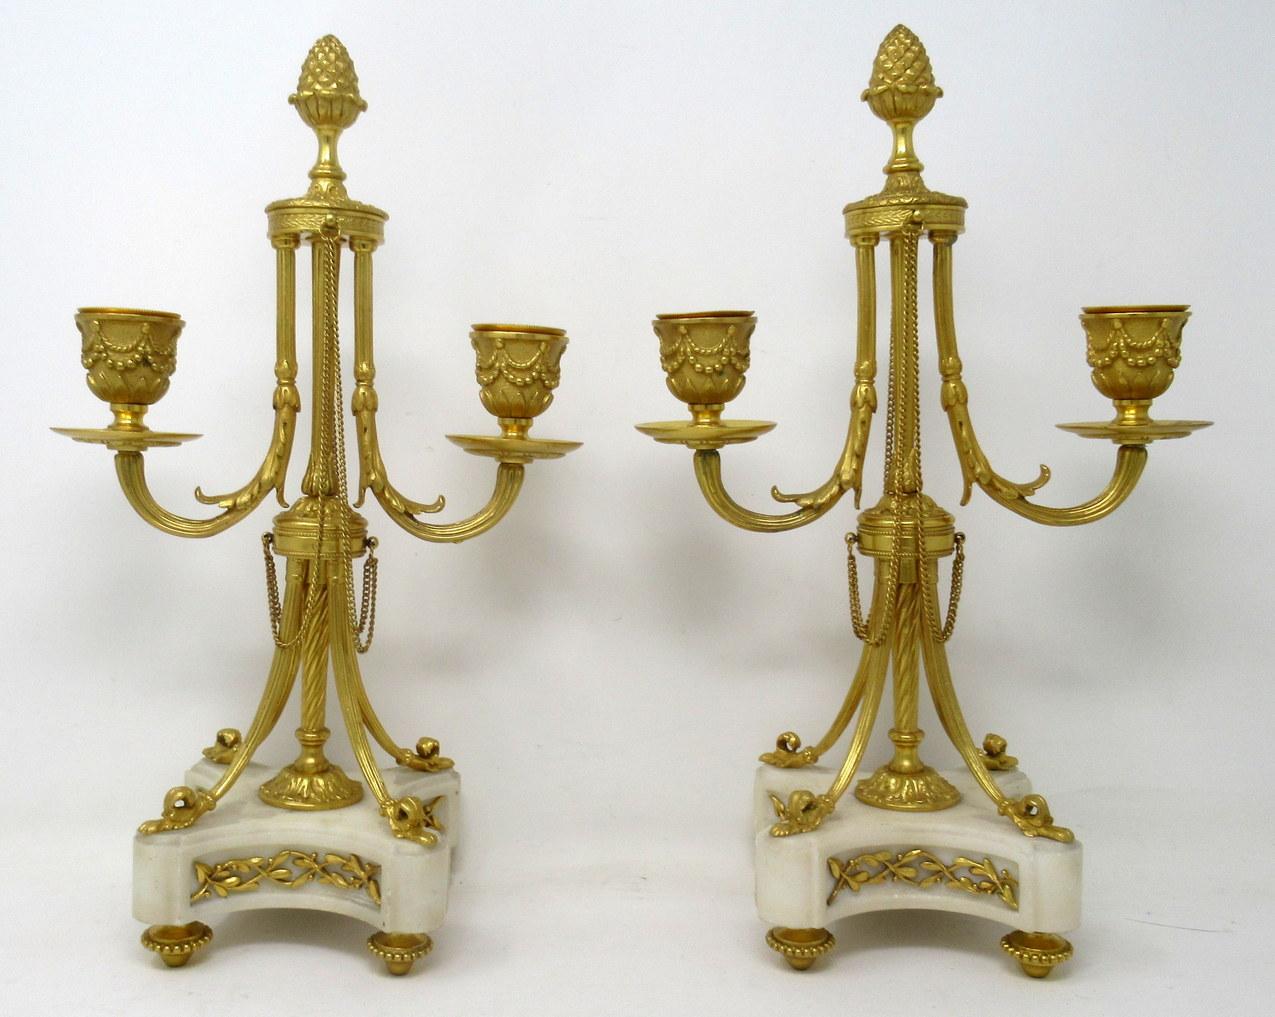 An exceptionally fine quality pair of French gilt bronze and statutory cream marble twin arm candelabra of medium proportions, made during the third quarter of the 19th century.

The finely chased candle sconces issuing from scrolling arms